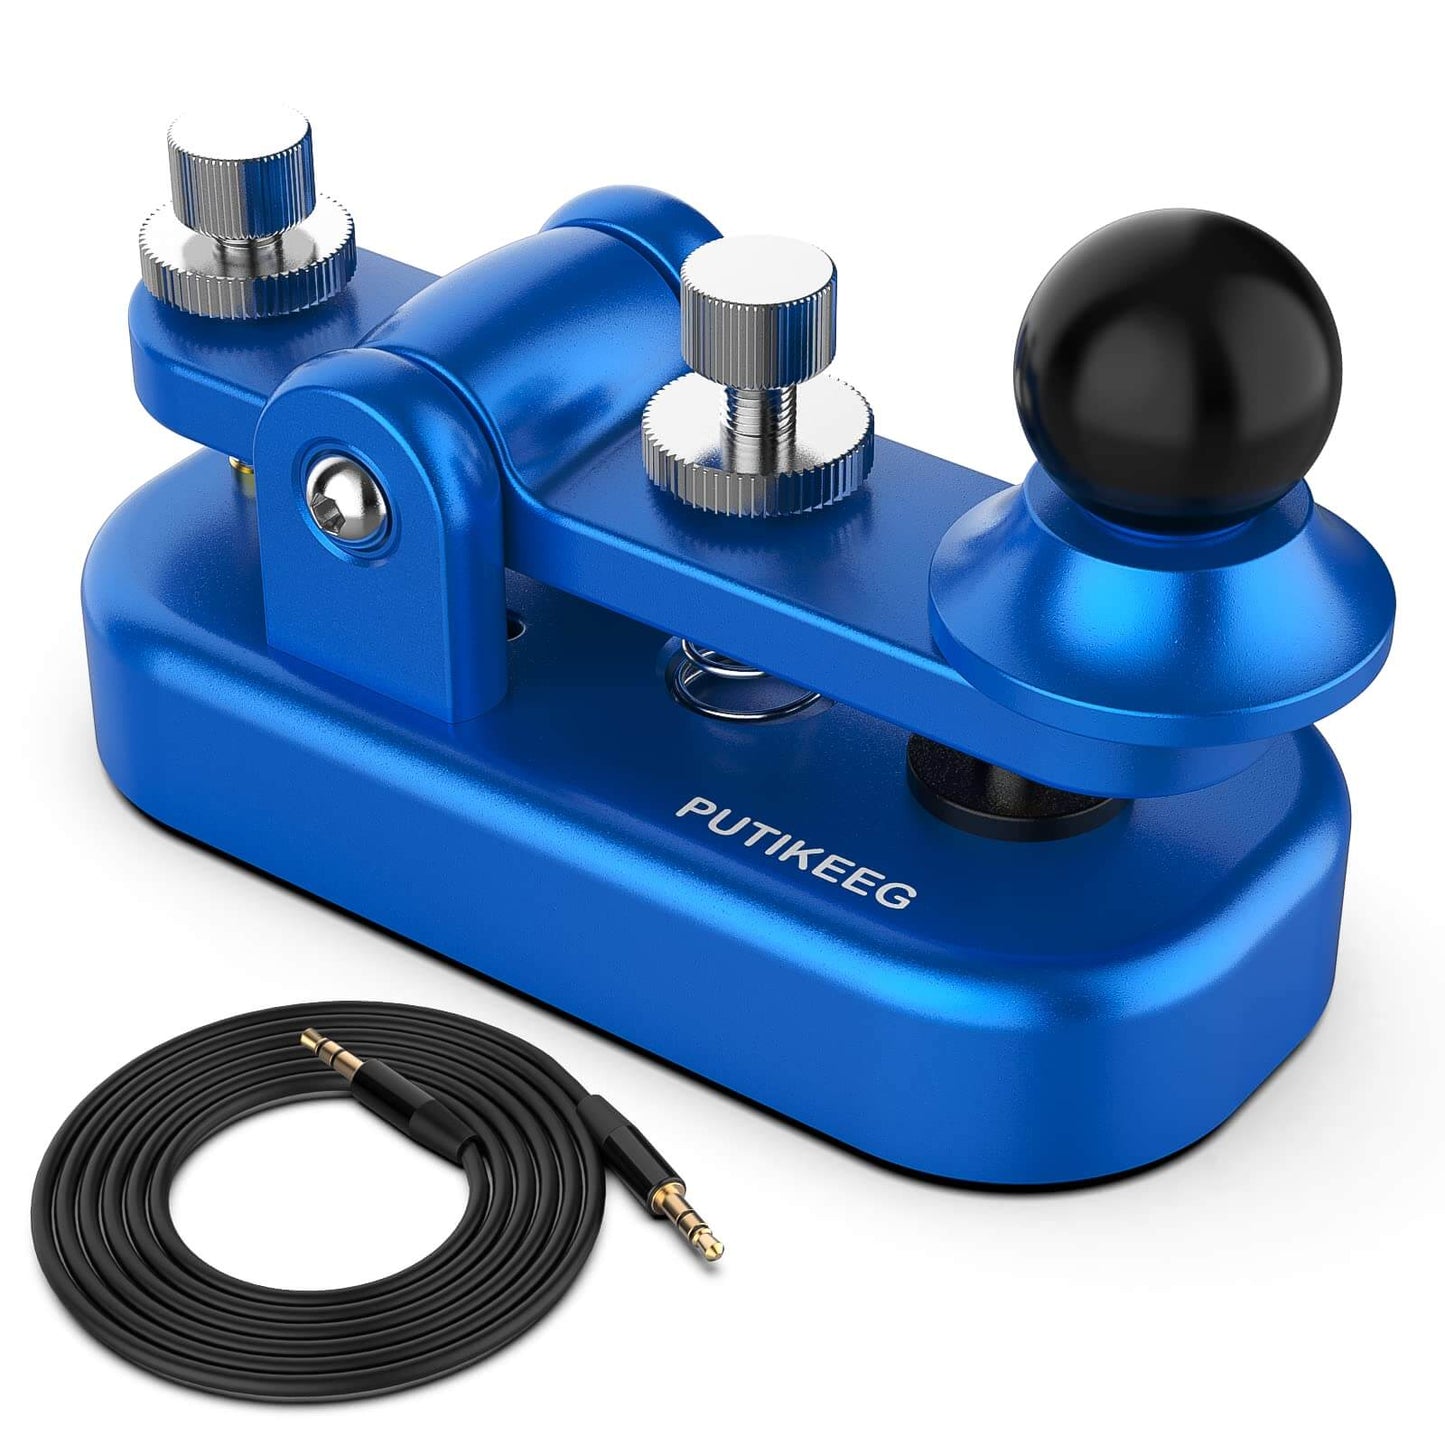 The is blue CW Morse Straight Key Mini offers precise and comfortable Morse code operation. This Straight Key Morse features tool-free paddle adjustment, a powerful magnetic return, and stable silicone foot pads. Made from durable 6061T6 aluminum alloy with NMB Japan bearings and 304 stainless steel screws, it is lightweight and portable, perfect for any radio device.